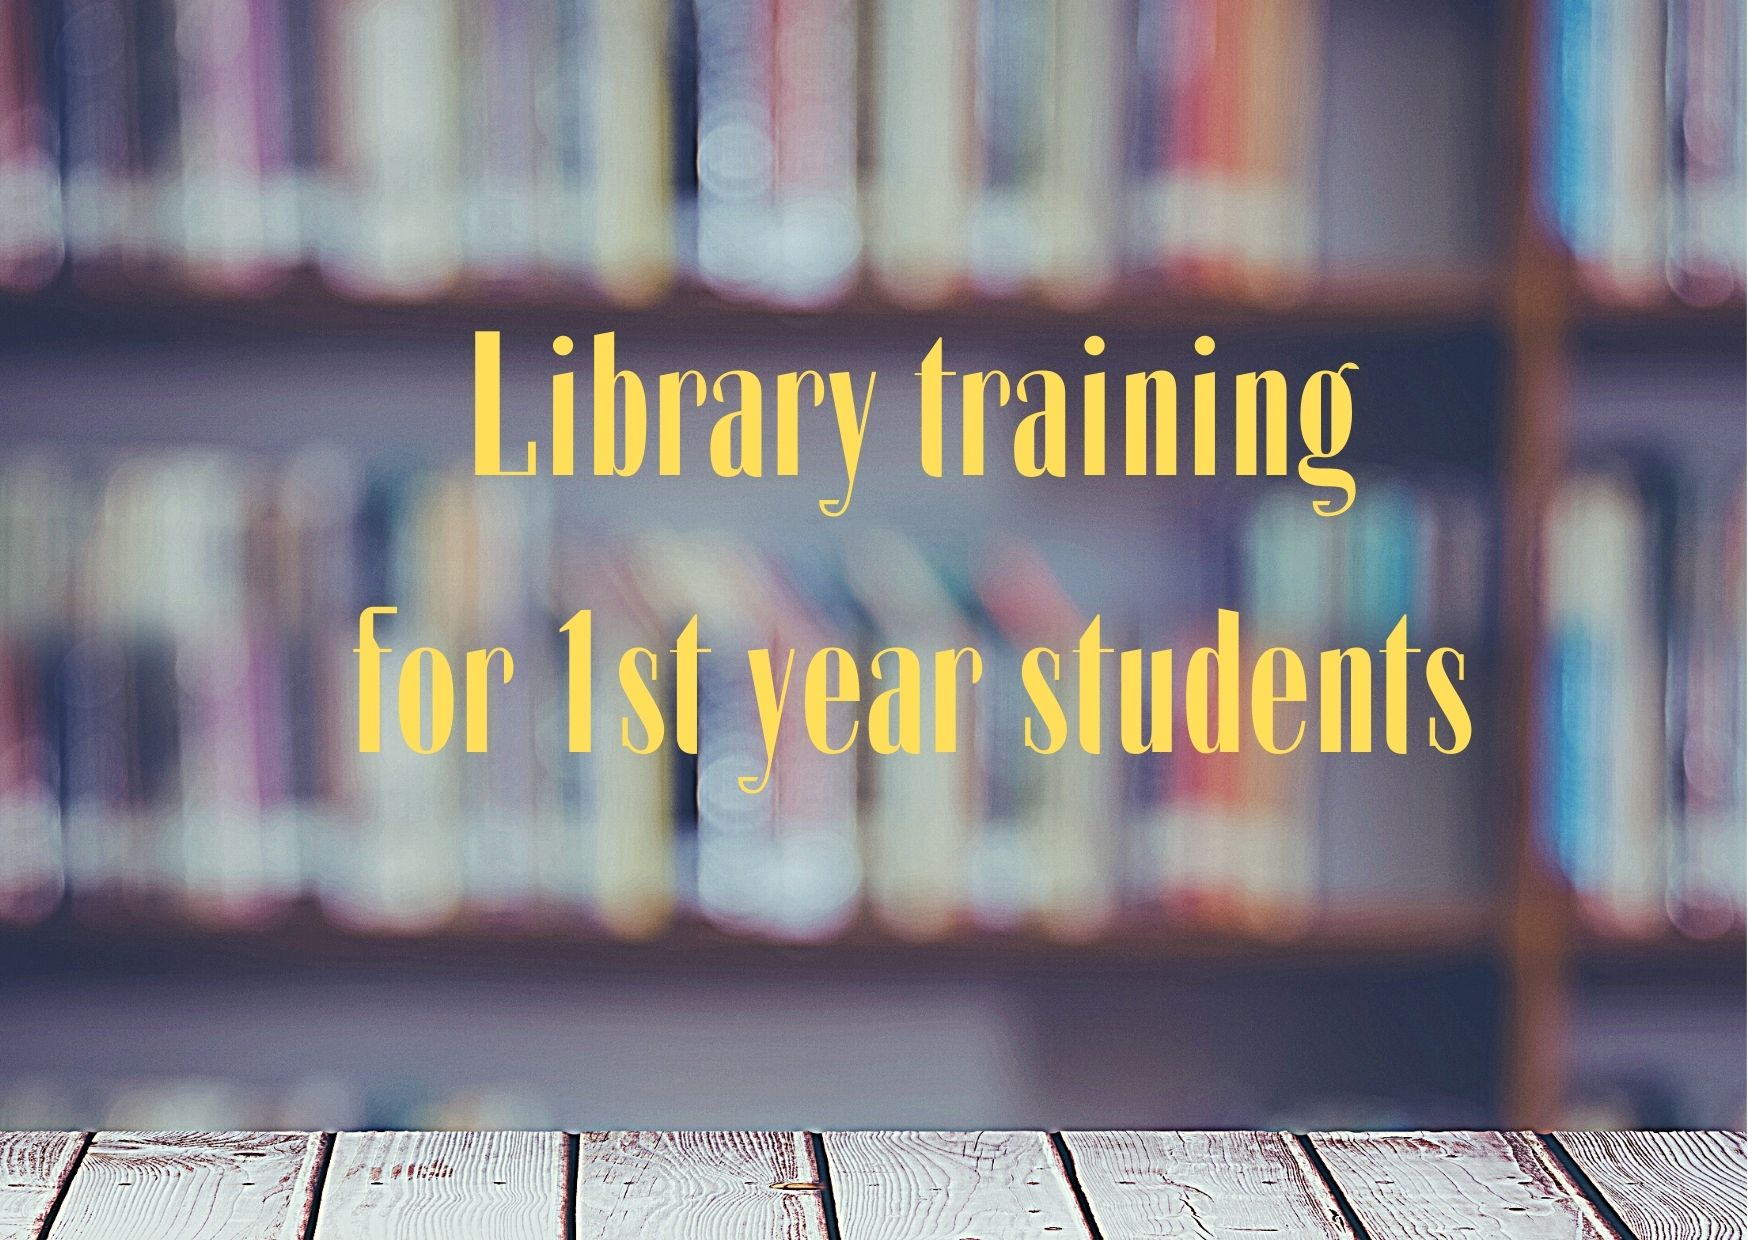 Library training for 1st  year students